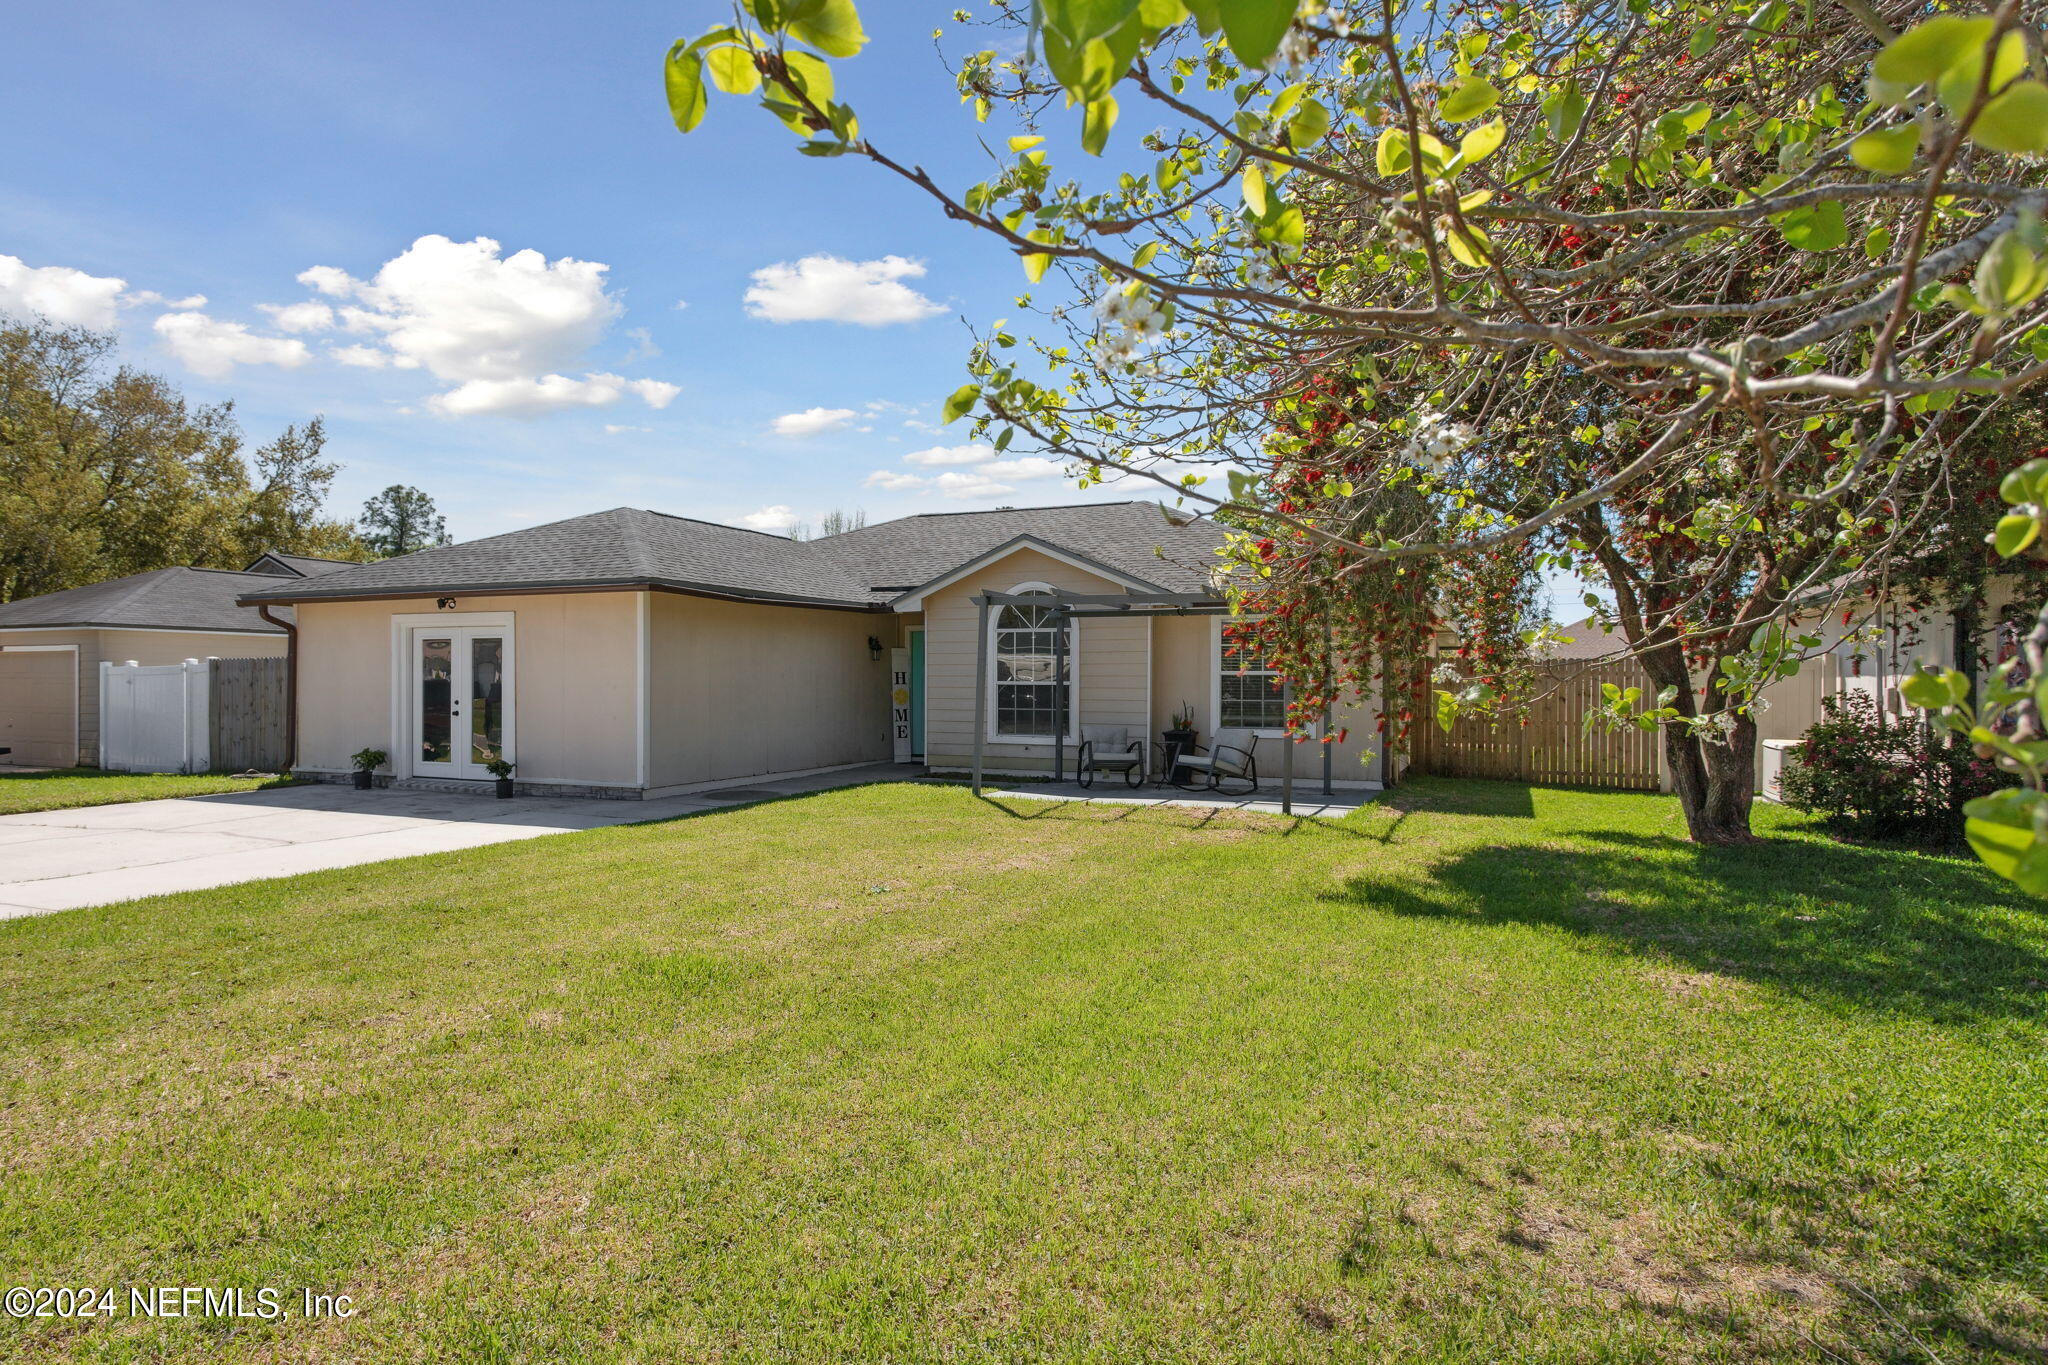 Middleburg, FL home for sale located at 2807 DIPLOMA Court, Middleburg, FL 32068